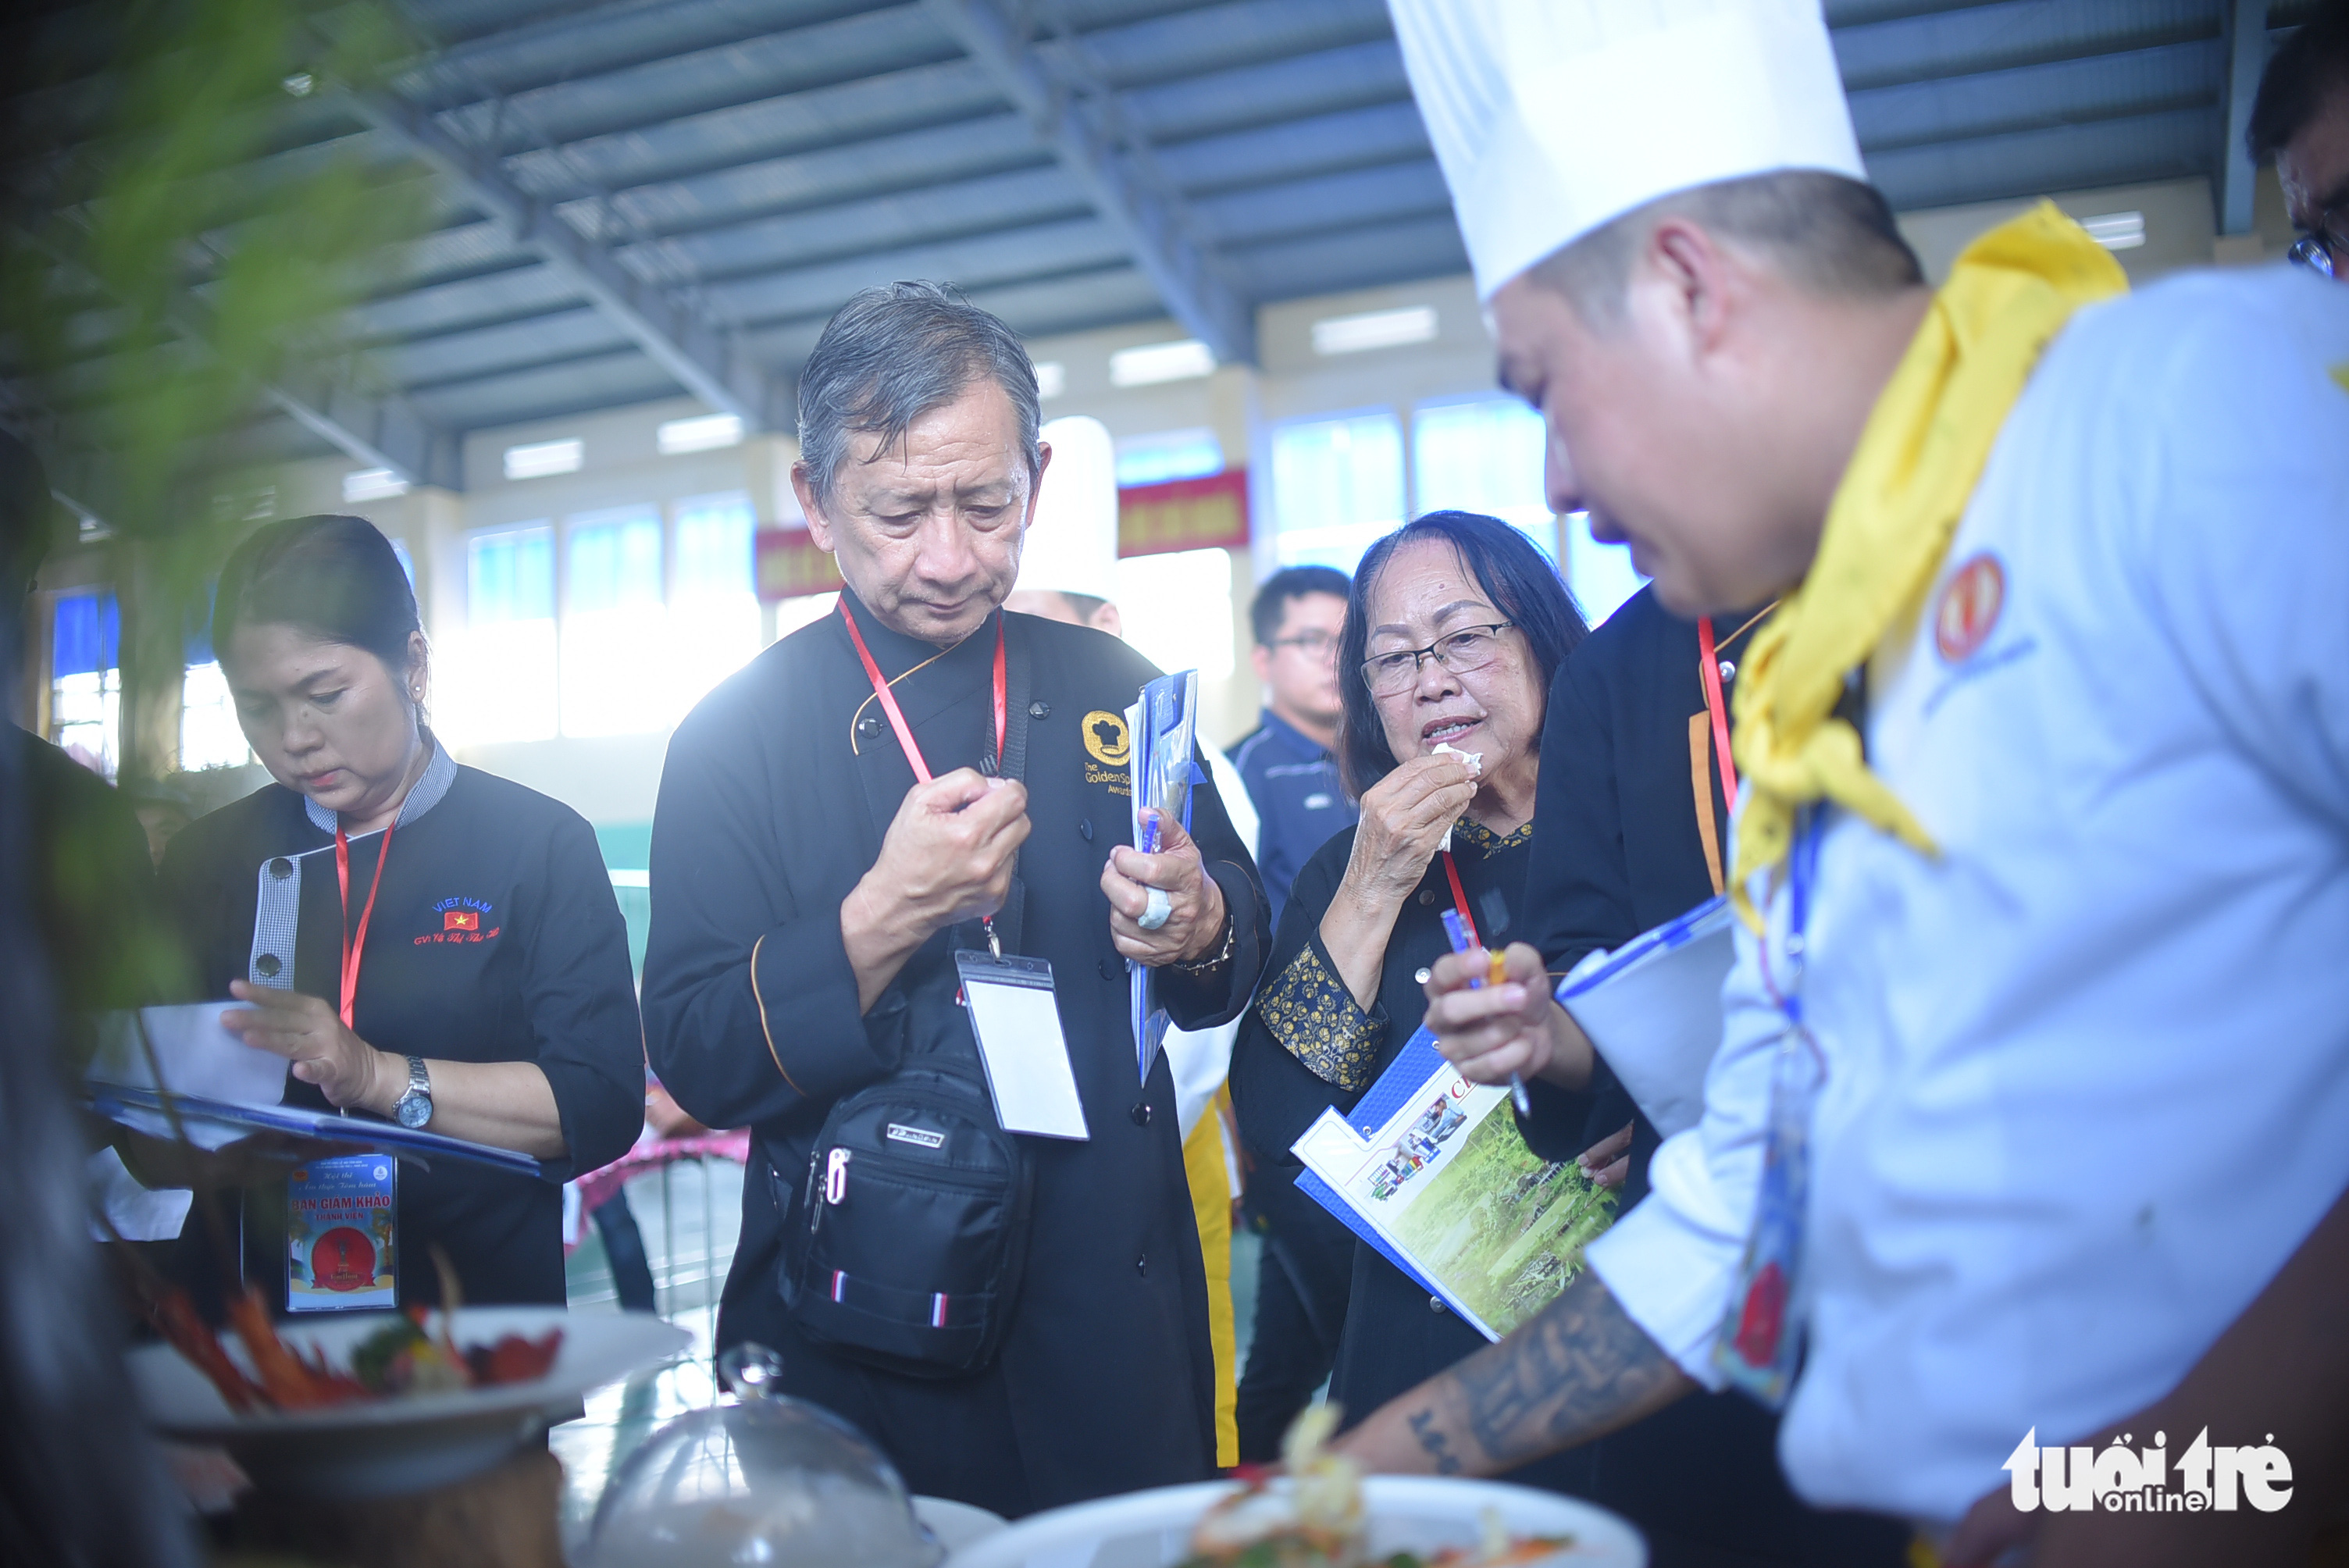 Judges evaluate dishes at a culinary contest in Phu Yen Province, Vietnam, July 31, 2022. Photo: Lam Thien / Tuoi Tre